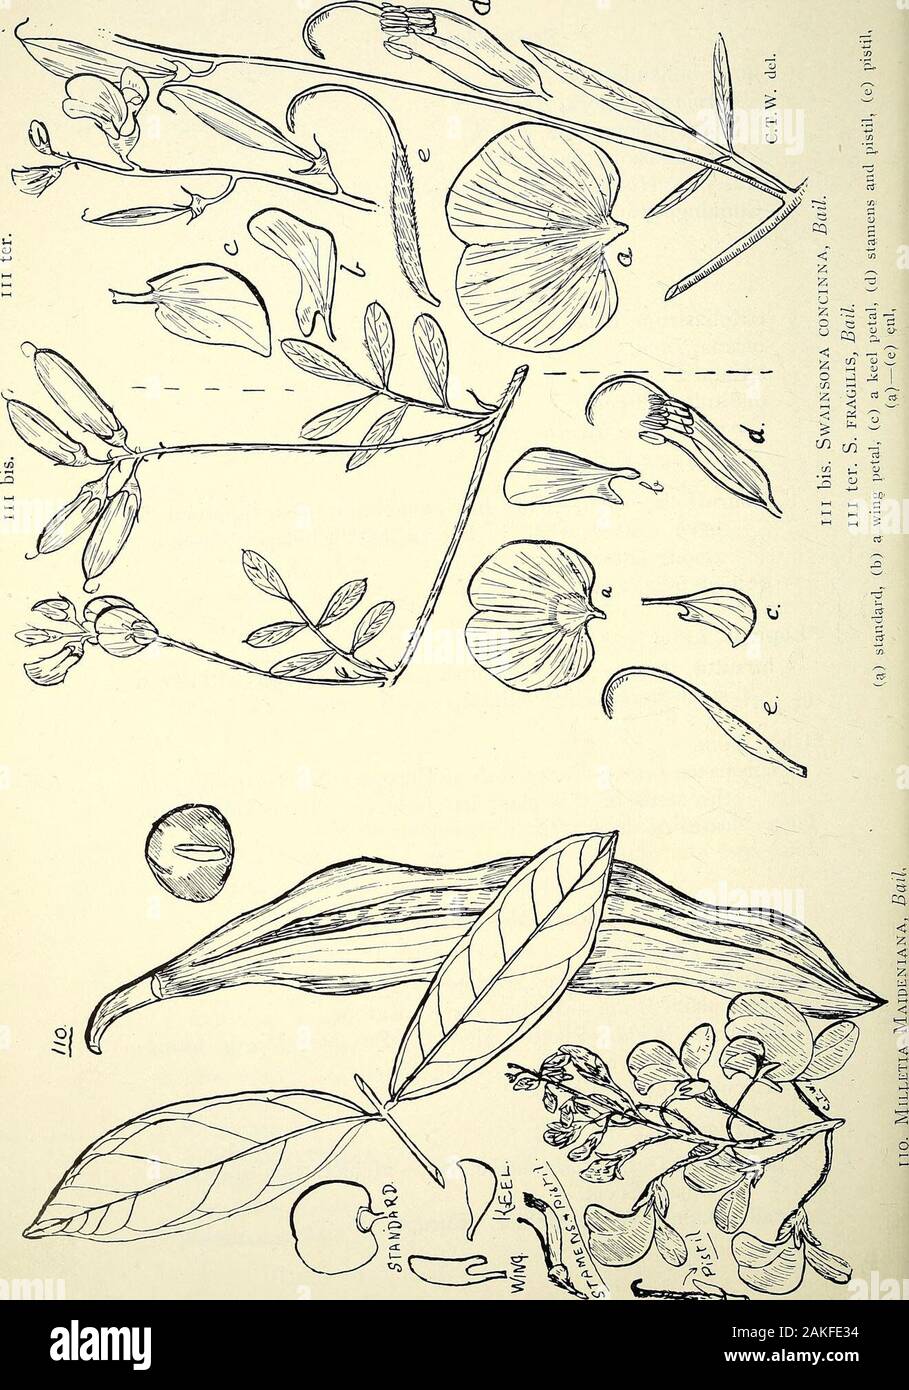 Comprehensive catalogue of Queensland plants, both indigenous and naturalisedTo which are added, where known, the aboriginal and other vernacular names; with numerous illustrations, and copious notes on the properties, features, &c., of the plants . gifolia, Benth forma lasiophylla, Benth.crassipes. Hook. ? Bail., Queensland Flora, 375.Cunninsrhamii, R. Br. Series Digitatce.trifoliastrum, Willd.incana, Linn.striata, DC.dissitiflora, Benth. var. eremaea, Benth var. rugosa, Benth laburnifolia, Linn.—This has sometimes been supposed tohave caused what is known as Chillagoe diseaseamong horses. qu Stock Photo